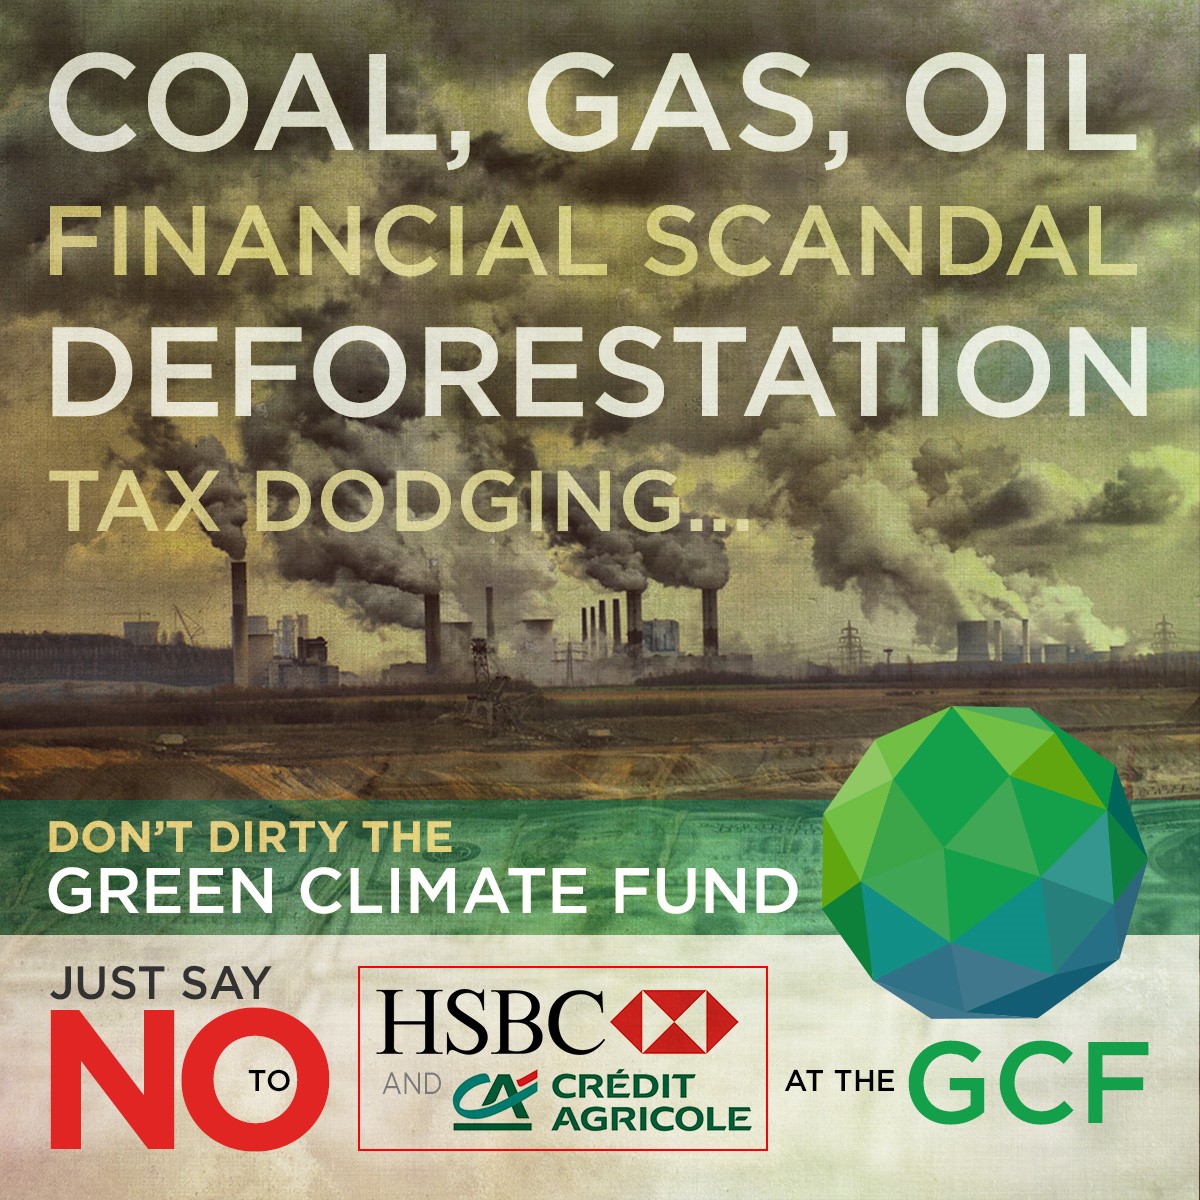 5 simple reasons to oppose HSBC and Credit Agricole at the Green Climate Fund